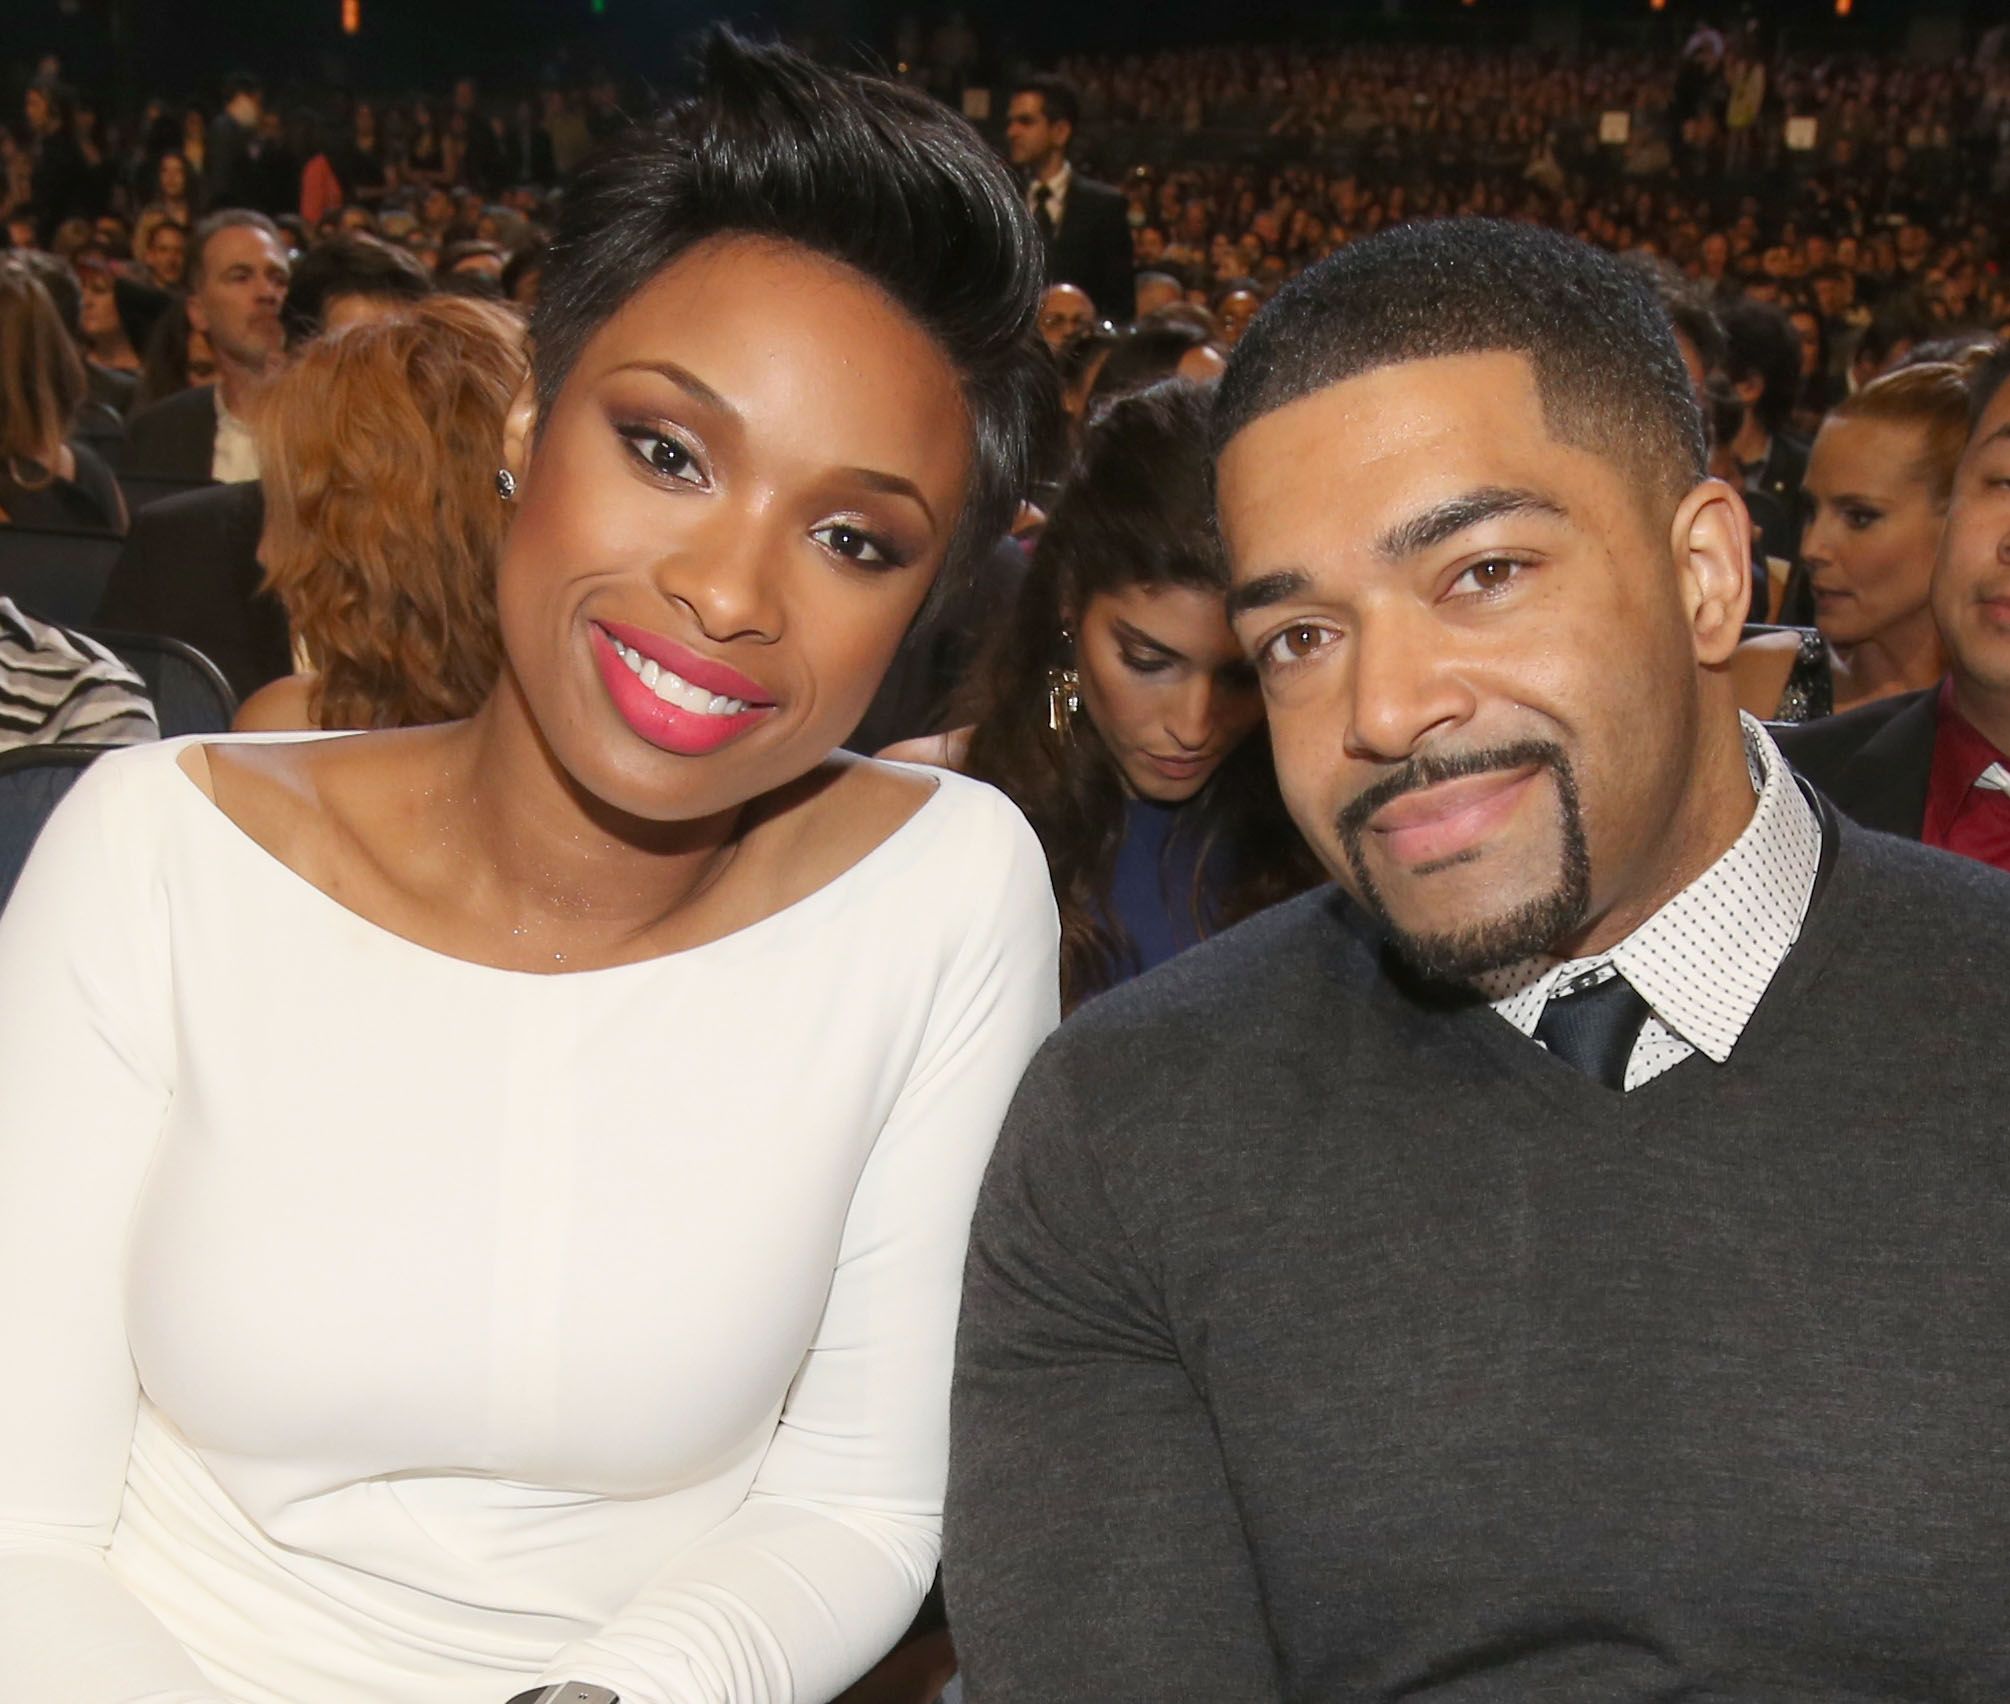 Jennifer Hudson and David Otunga at the 40th Annual People's Choice Awards on January 8, 2014 in Los Angeles, California. | Photo: Getty Images